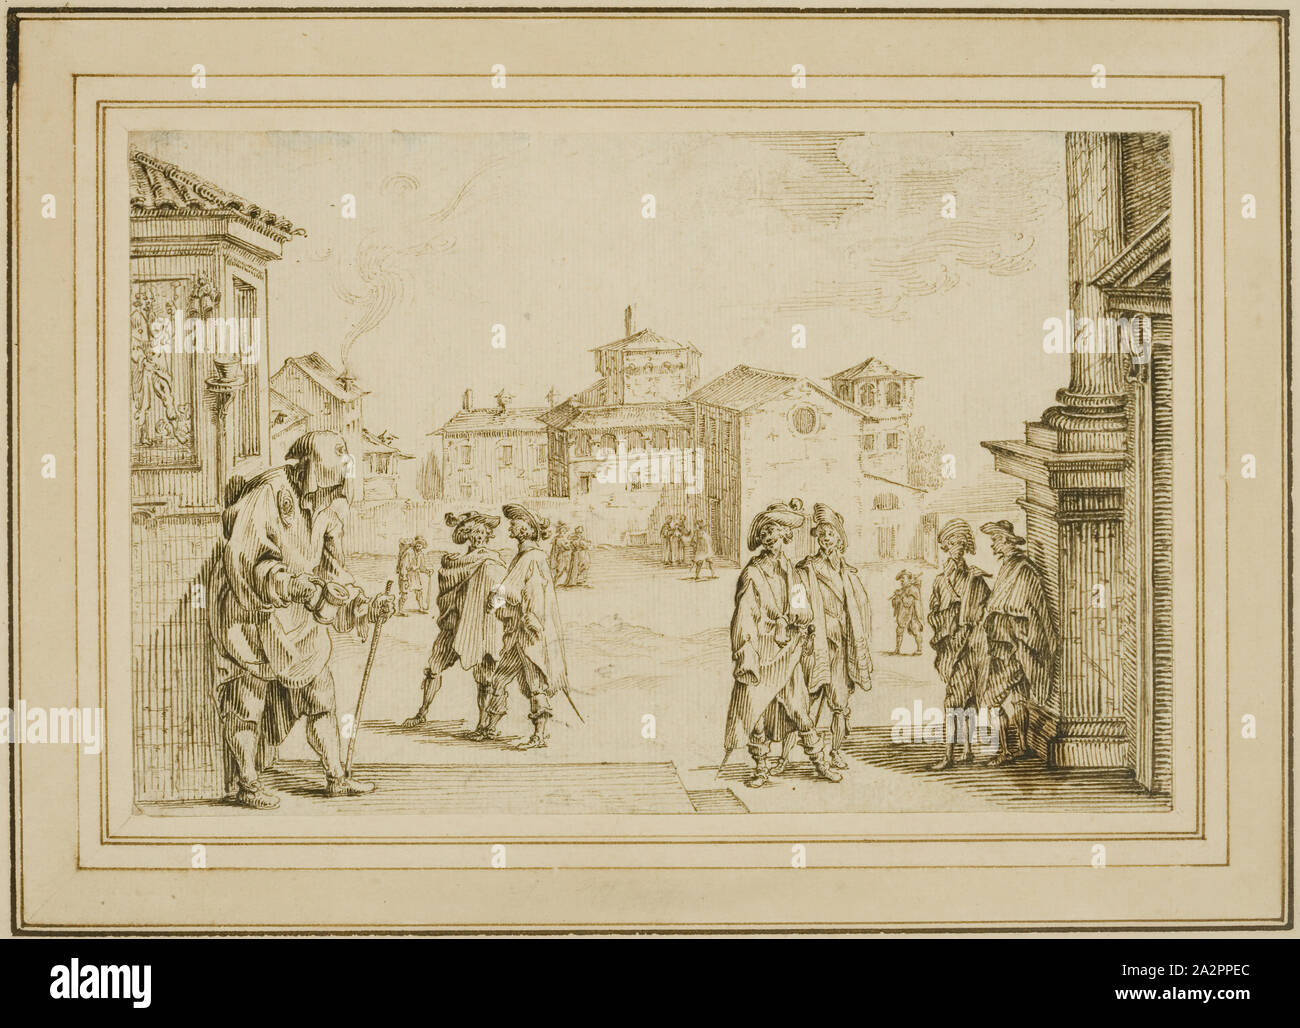 Ercole Bazicaluva, Italian, 1610-1661, Soldiers and a Blind Beggar on a Stage Set, between 1610 and 1661, pen and brown ink on cream laid paper, Sheet: 5 1/8 × 8 inches (13 × 20.3 cm Stock Photo